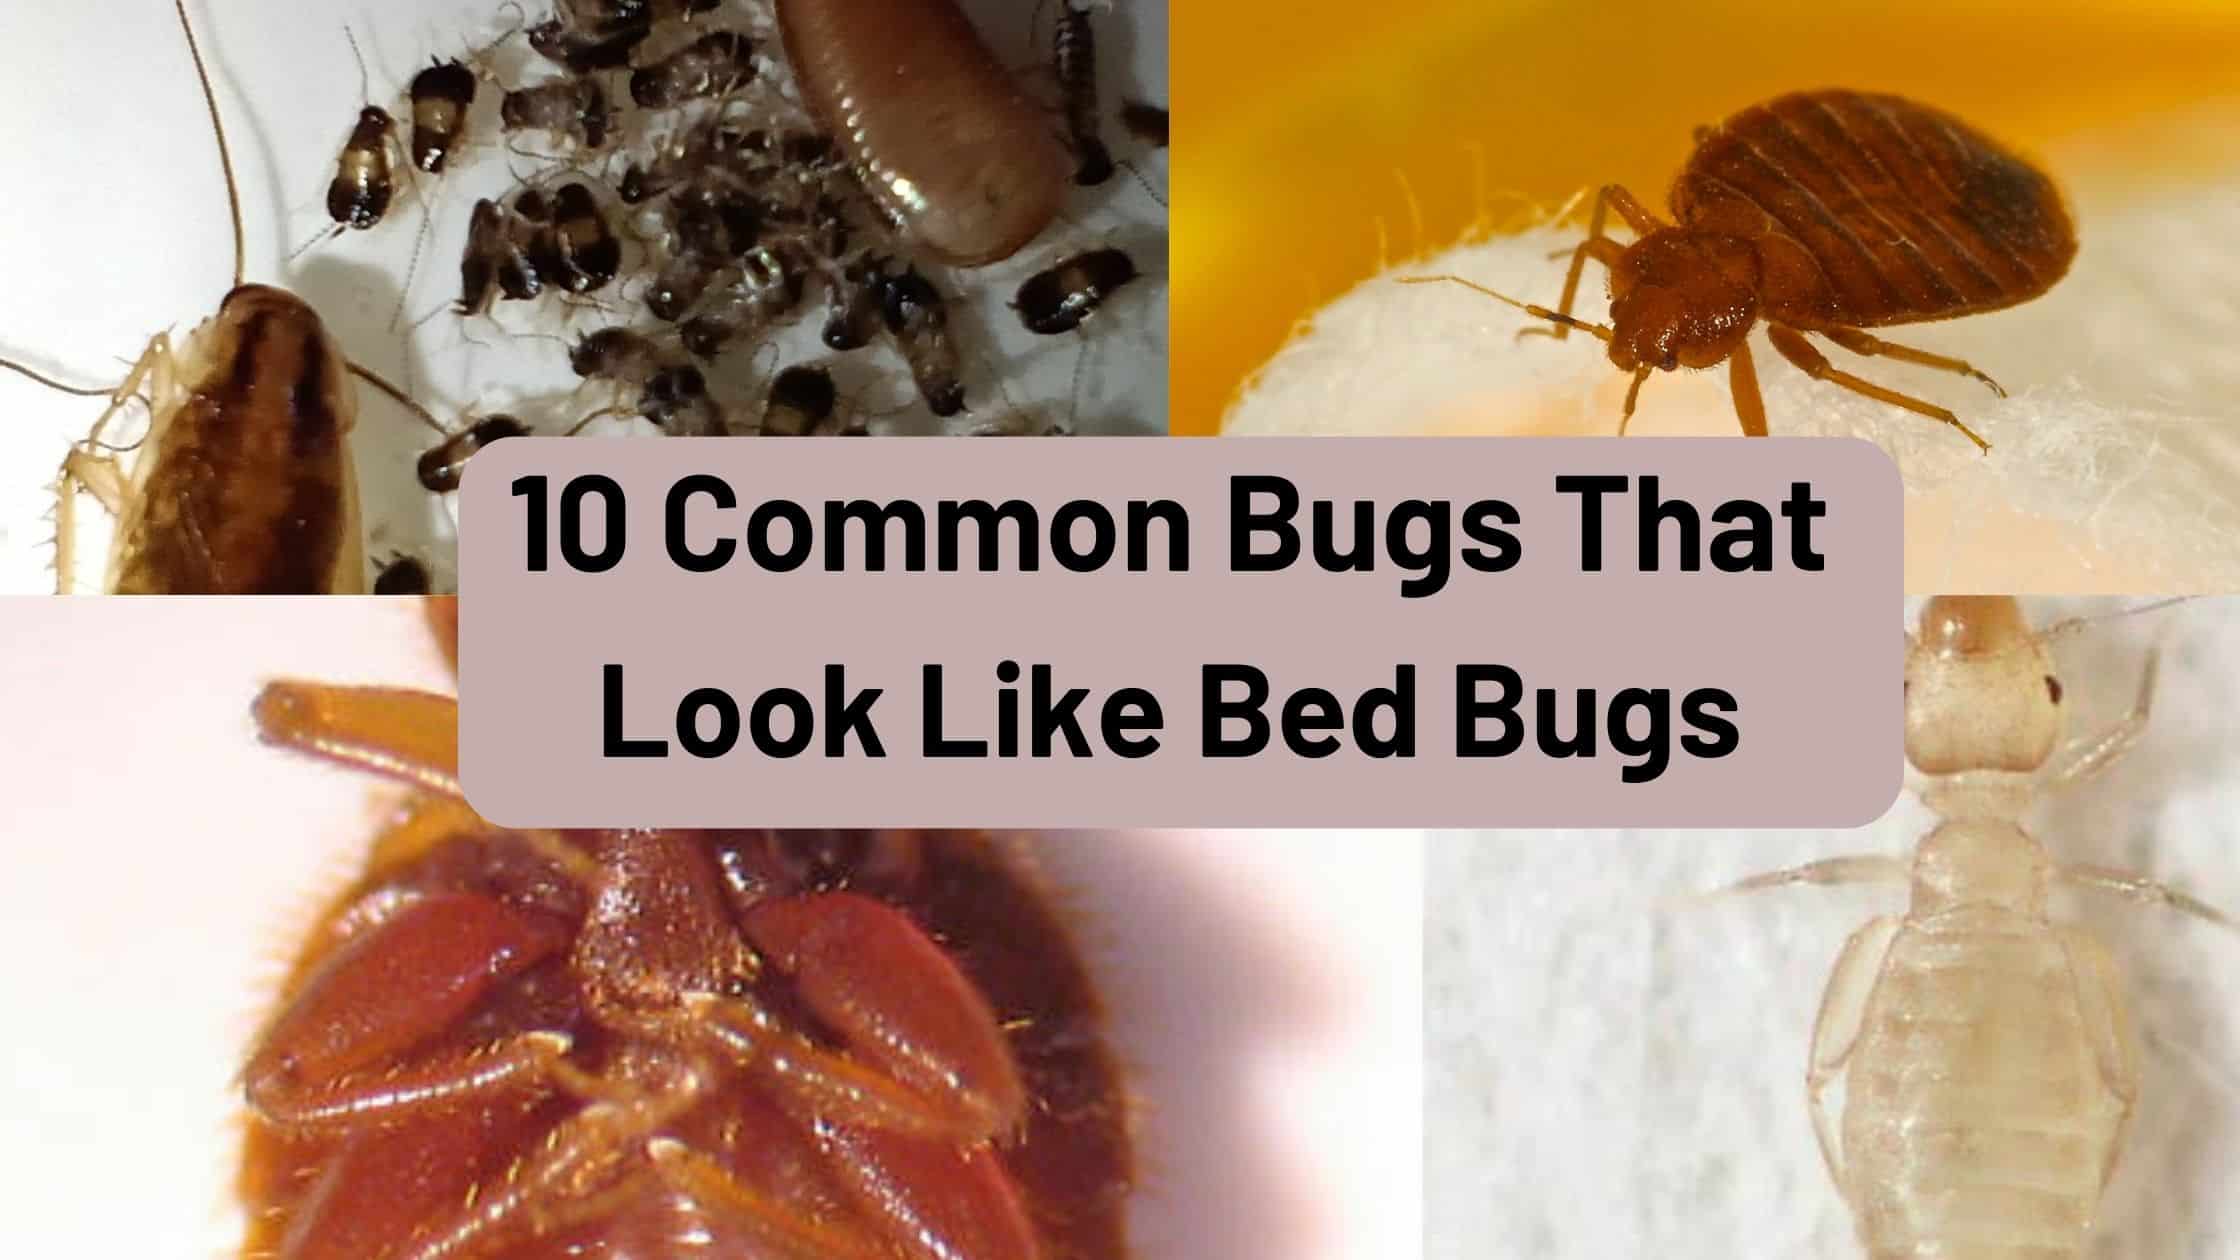  10 Common Bugs That Look Like Bed Bugs